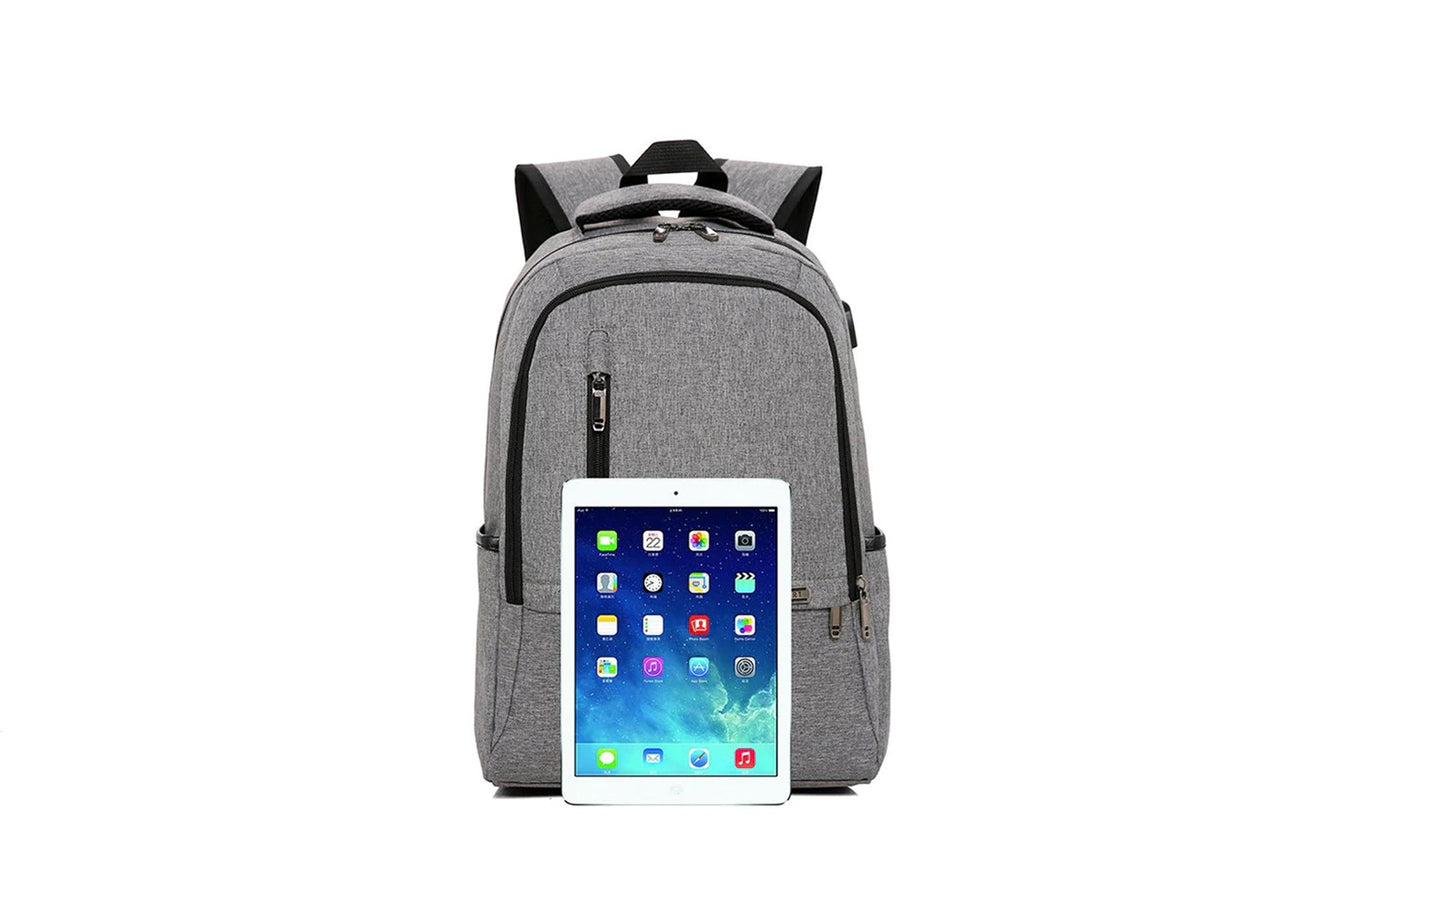 N-Sport Backpack with USB Port - Grey